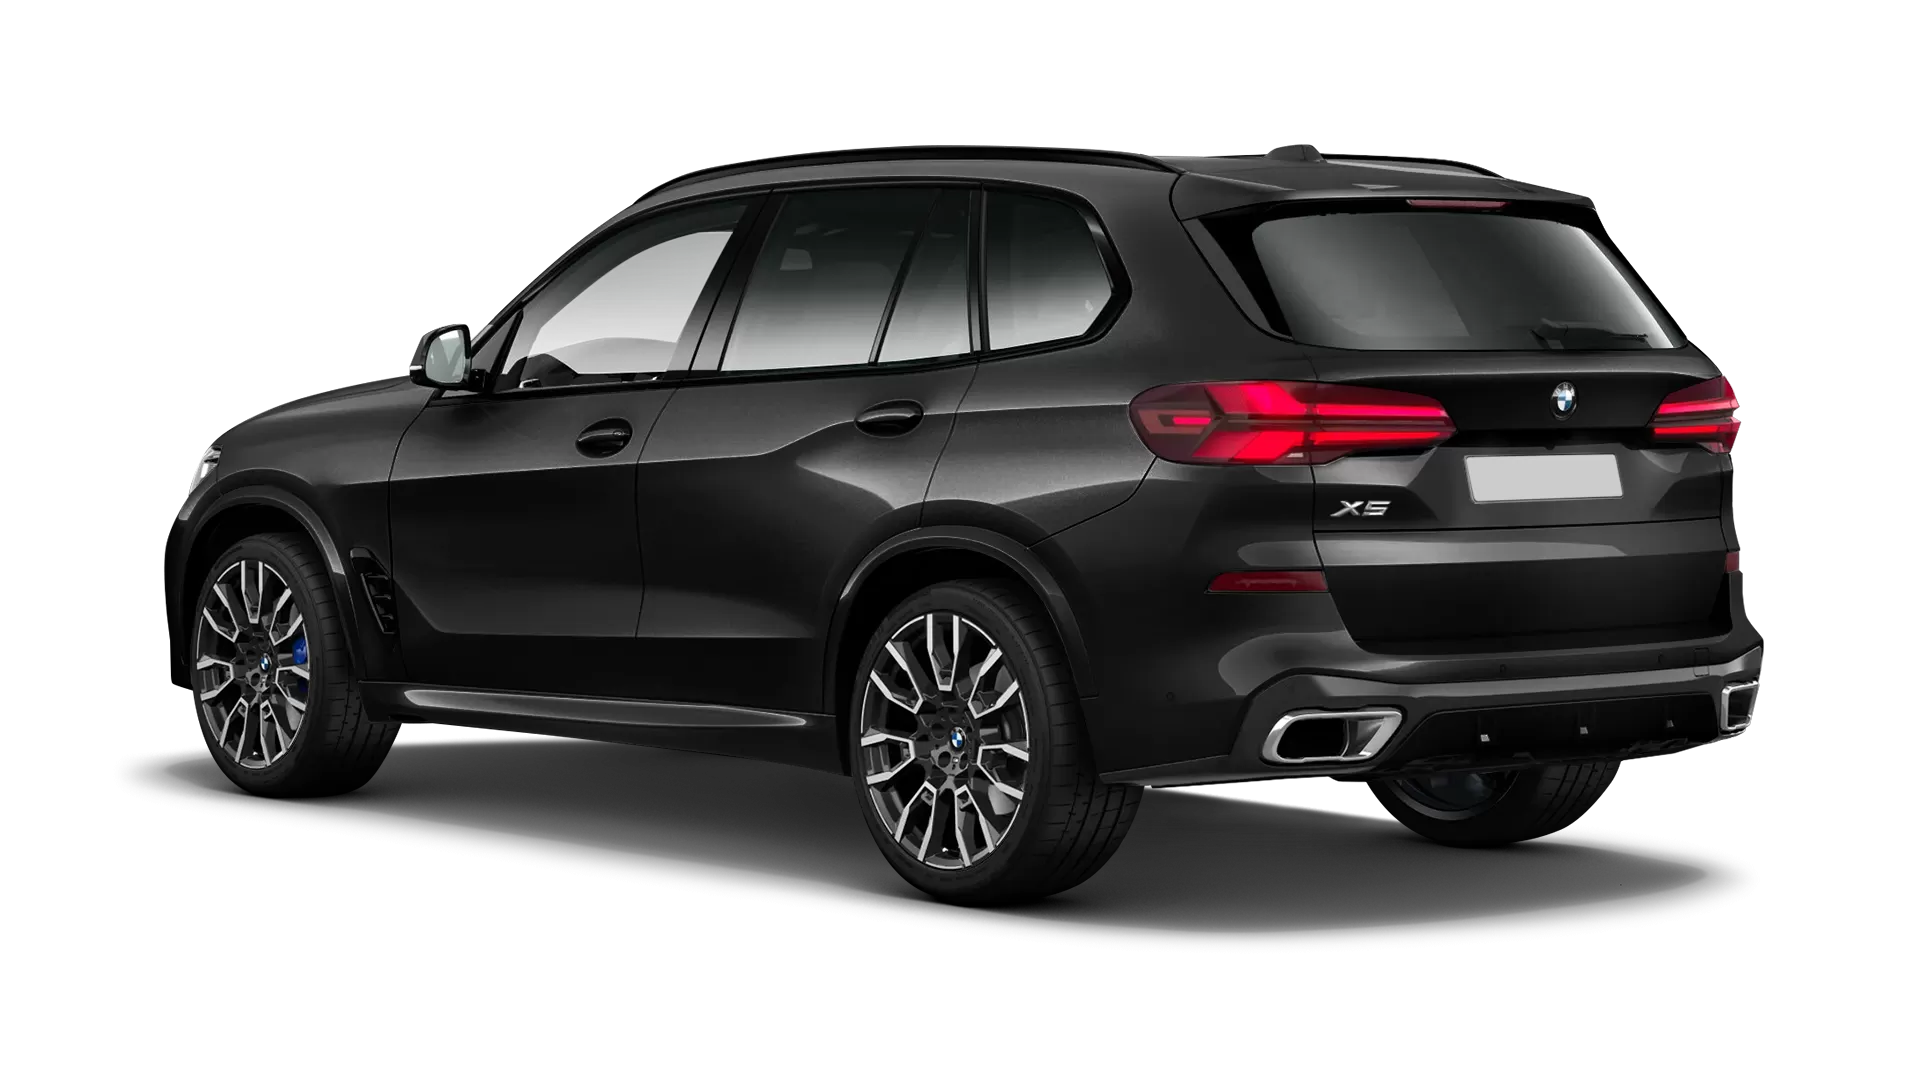 BMW X5 G05 LCI Facelift stock rear view in Sapphire Black color